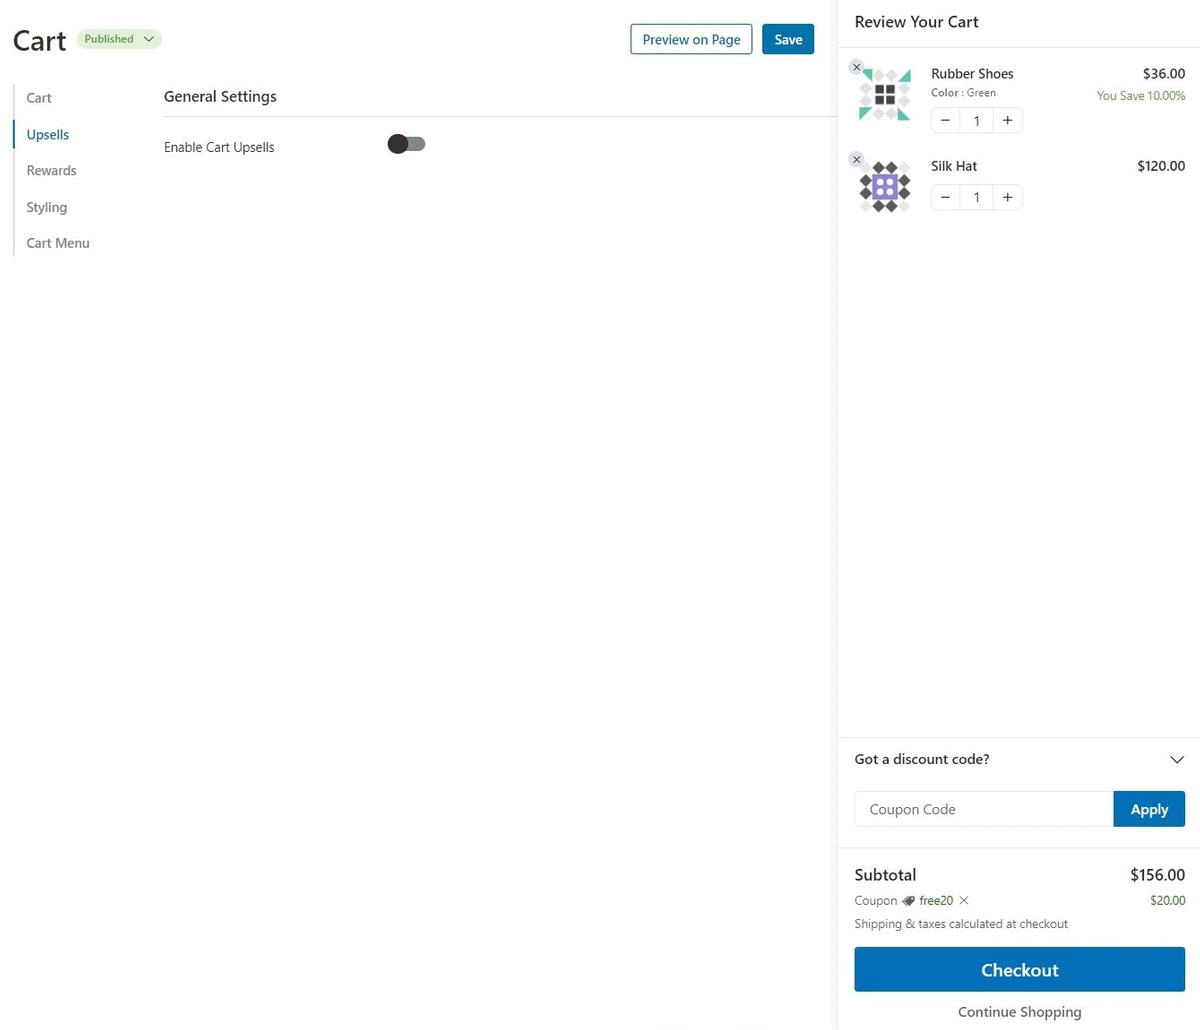 Enable and disable cart upsells